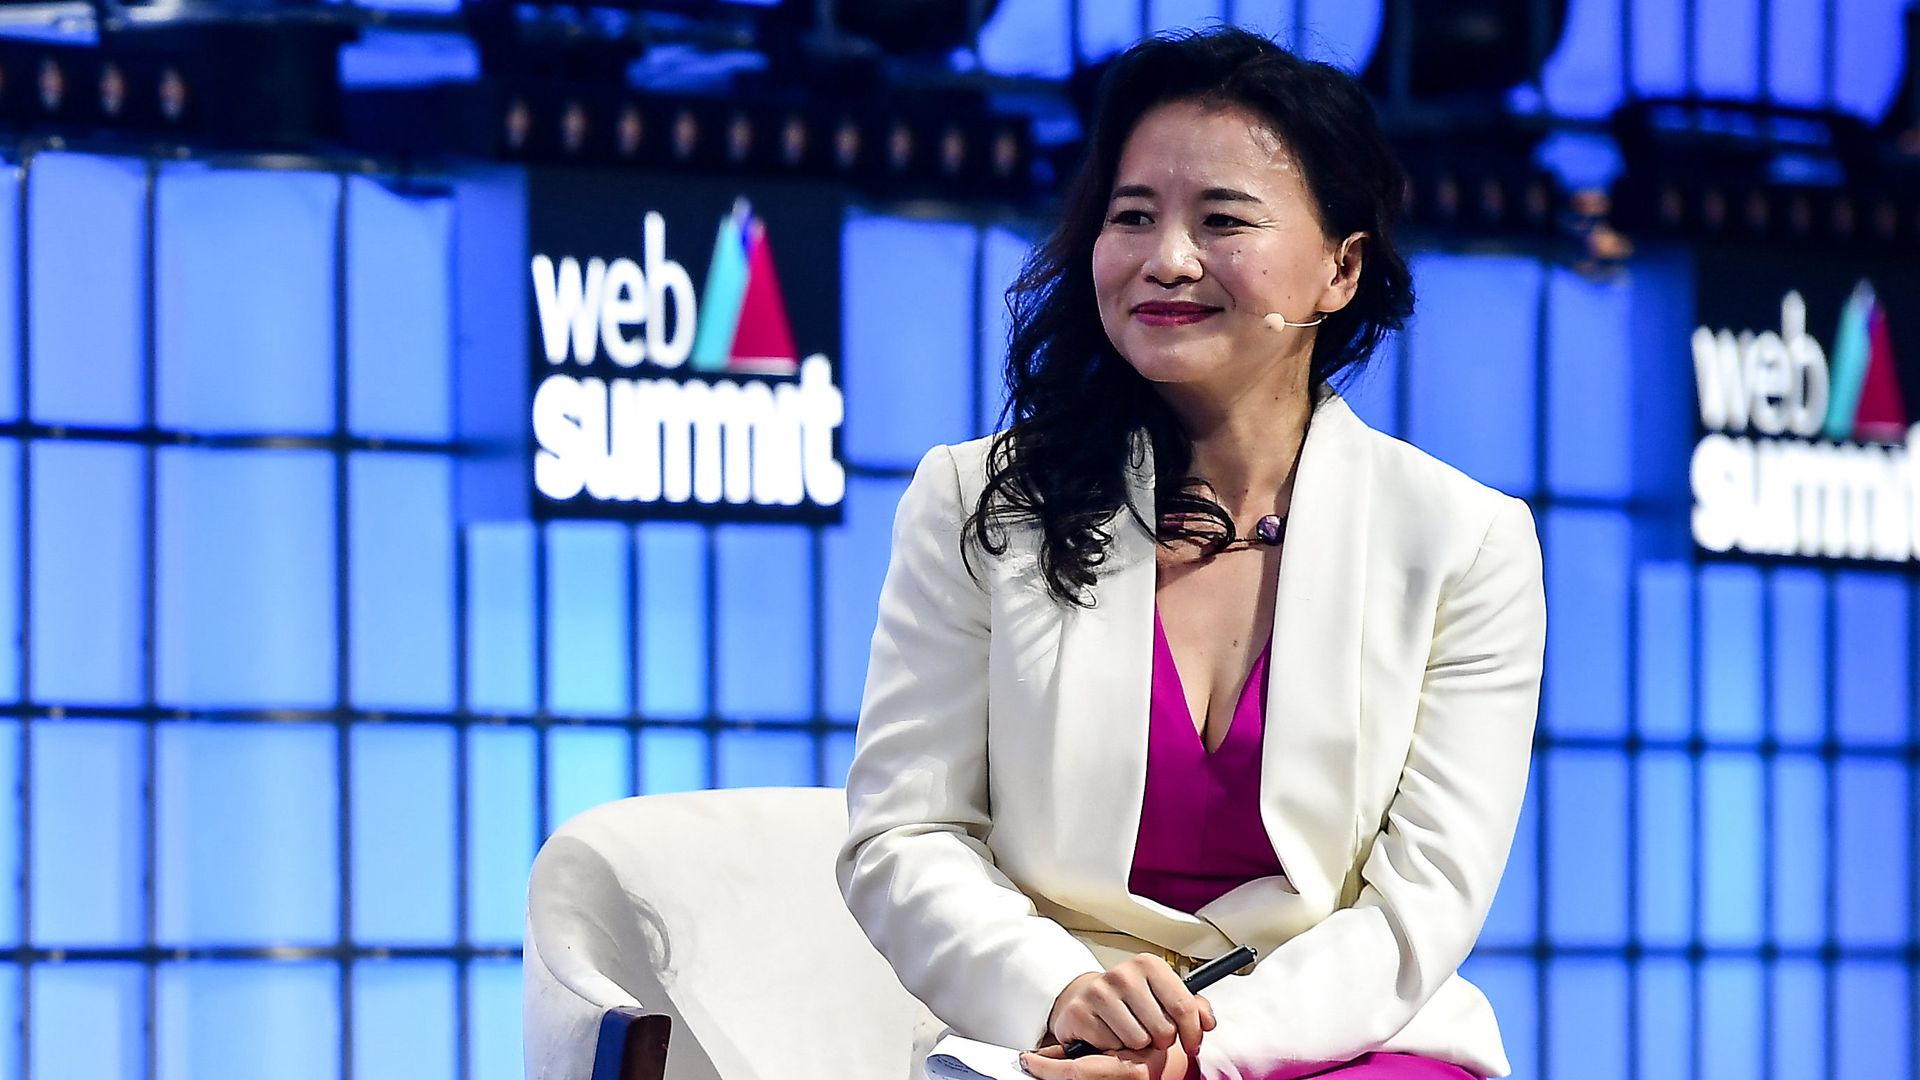 Cheng Lei, Anchor, CGTN Europe, on Centre Stage during the opening day of Web Summit 2019 at the Altice Arena in Lisbon, Portugal.